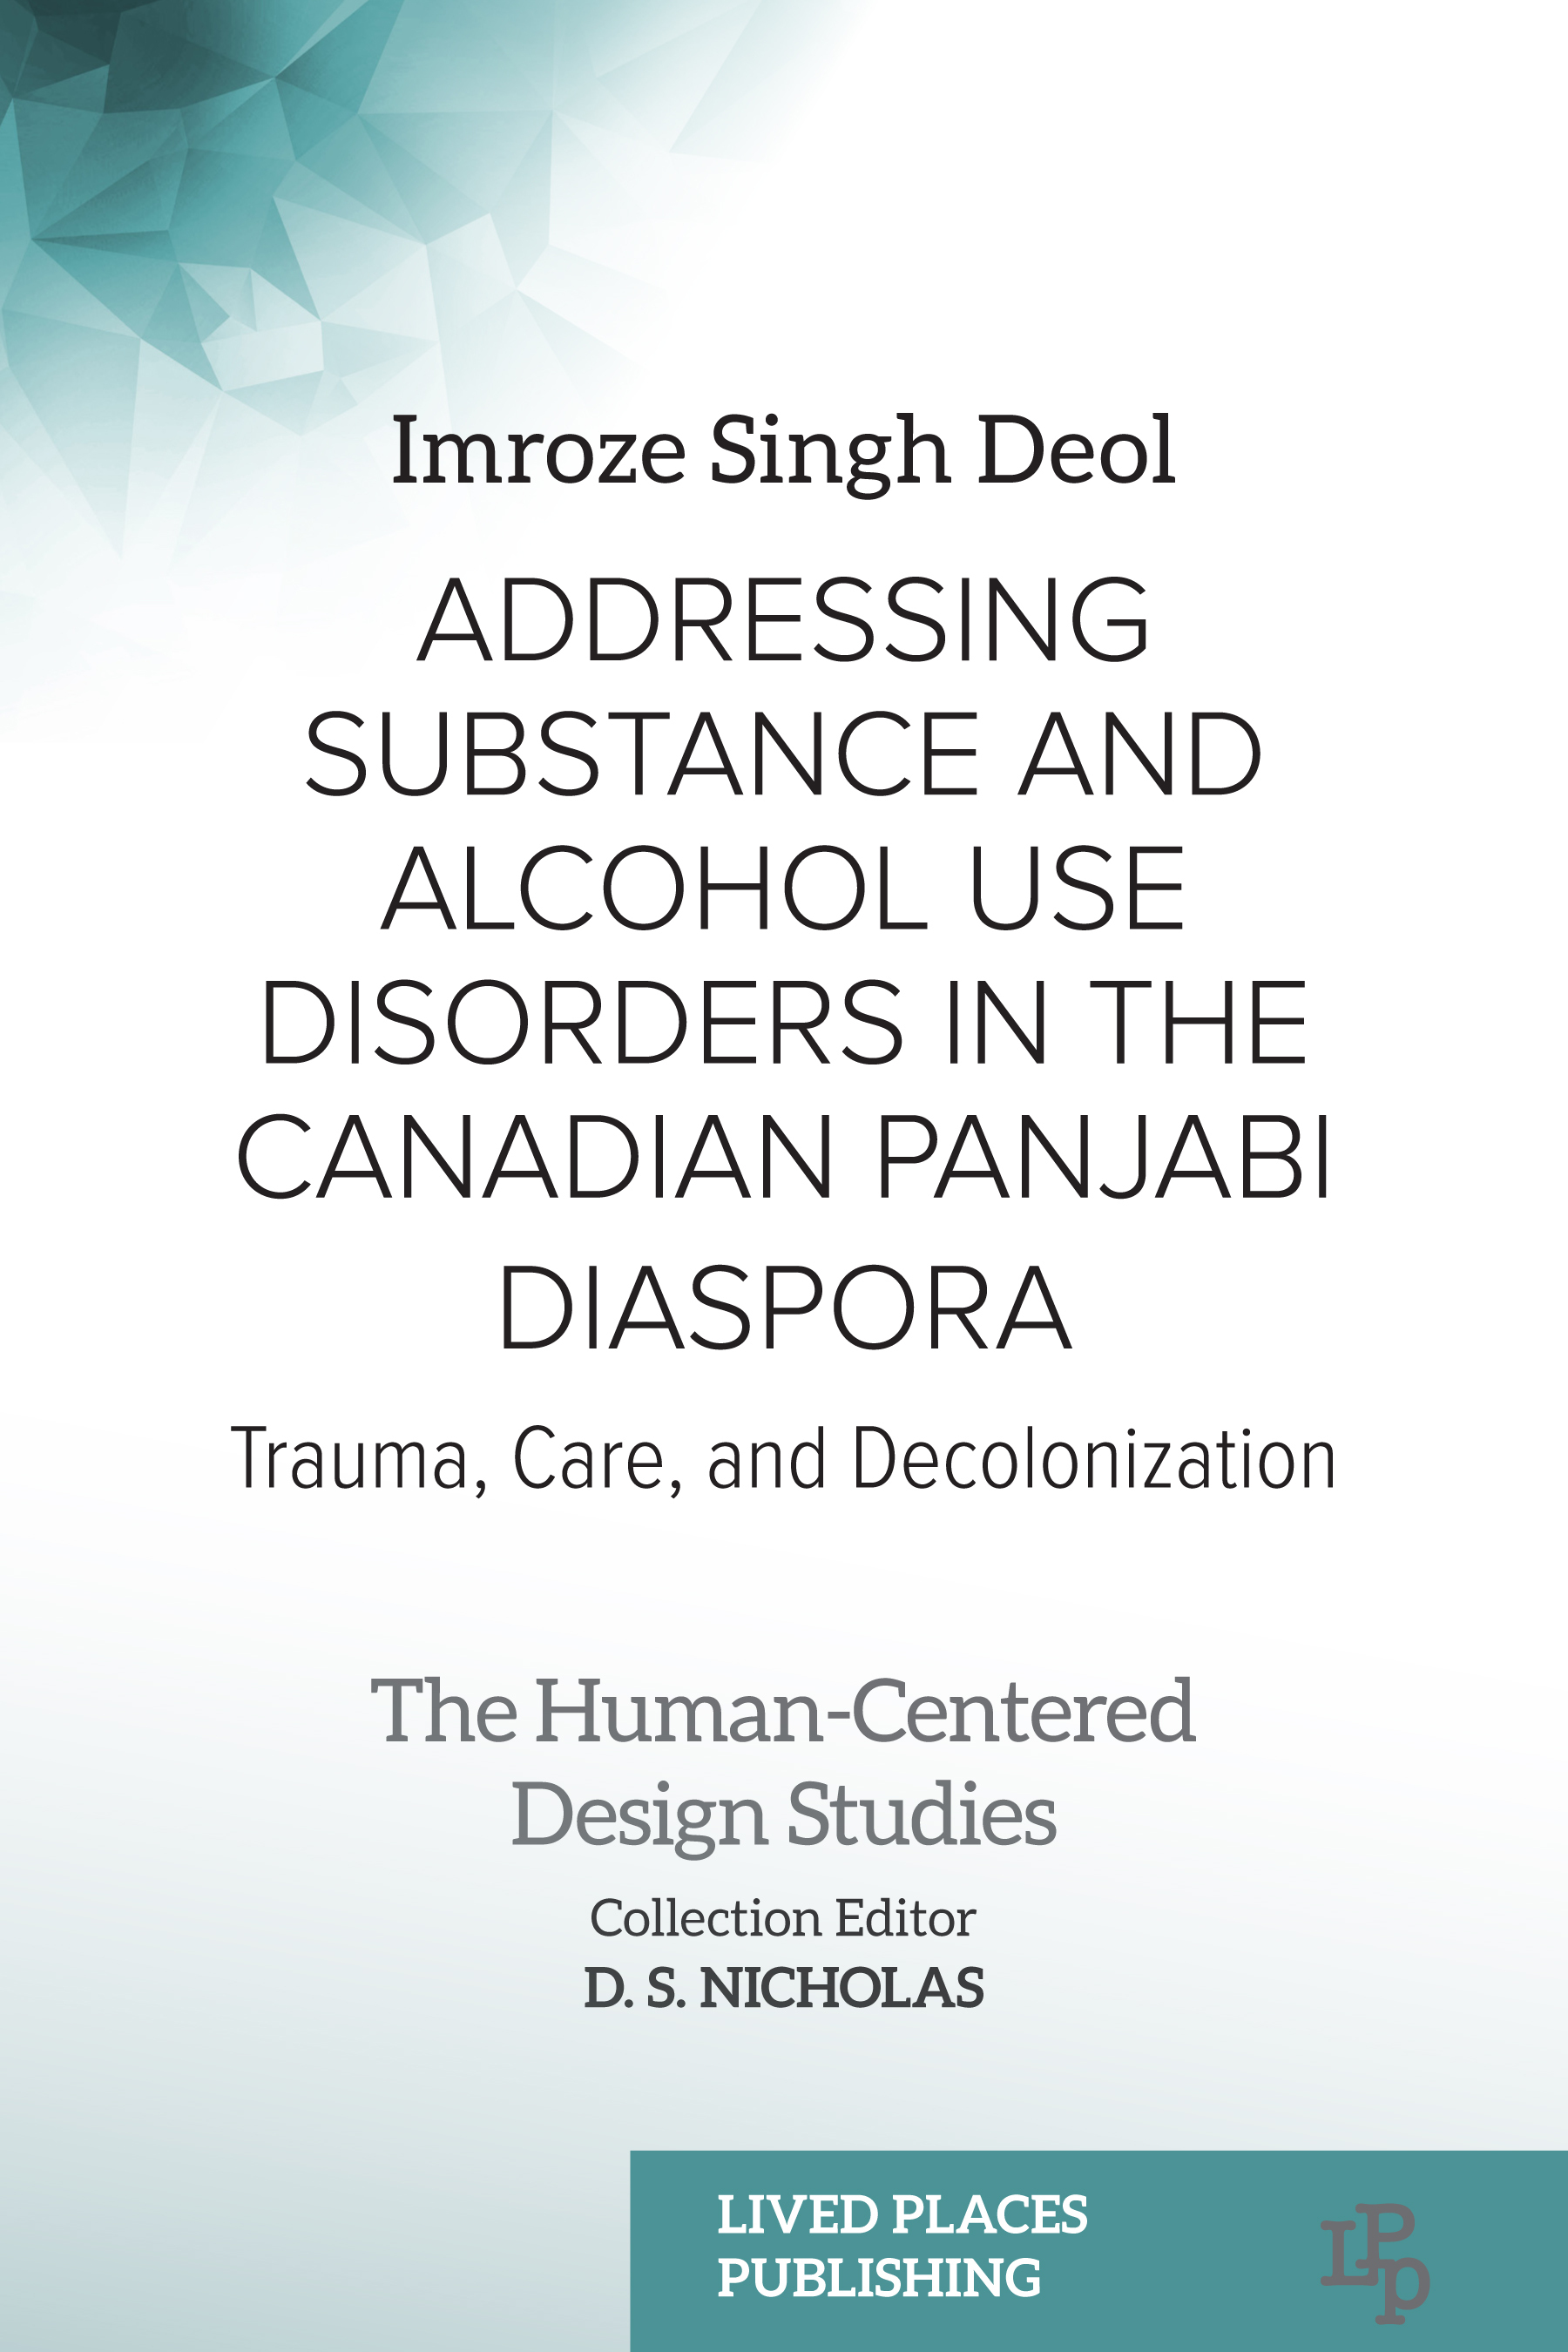 Addressing Substance and Alcohol Use Disorders in the Canadian Panjabi Diaspora